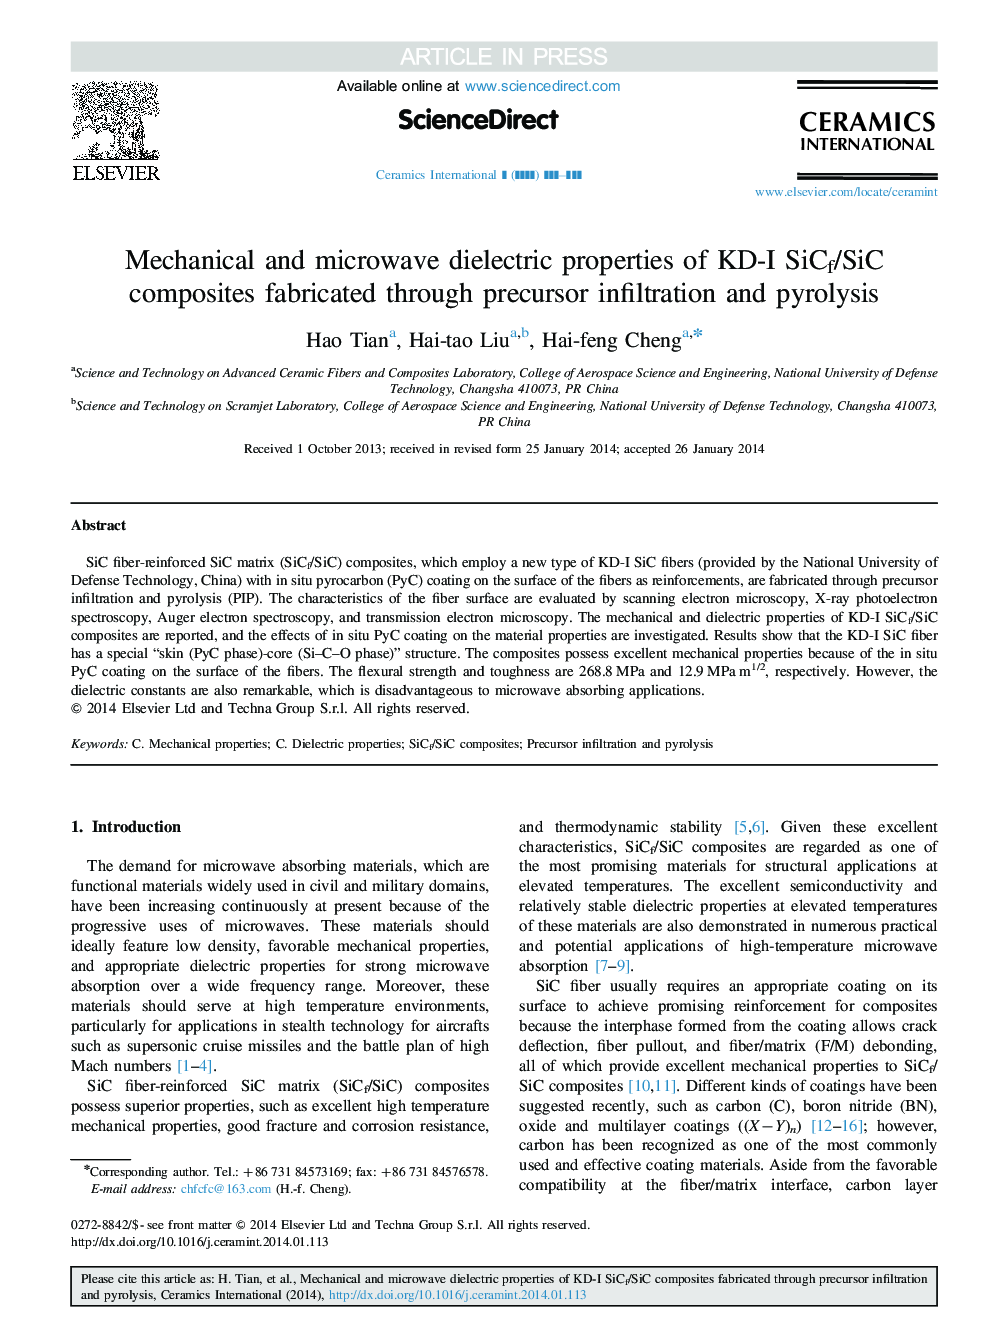 Mechanical and microwave dielectric properties of KD-I SiCf/SiC composites fabricated through precursor infiltration and pyrolysis